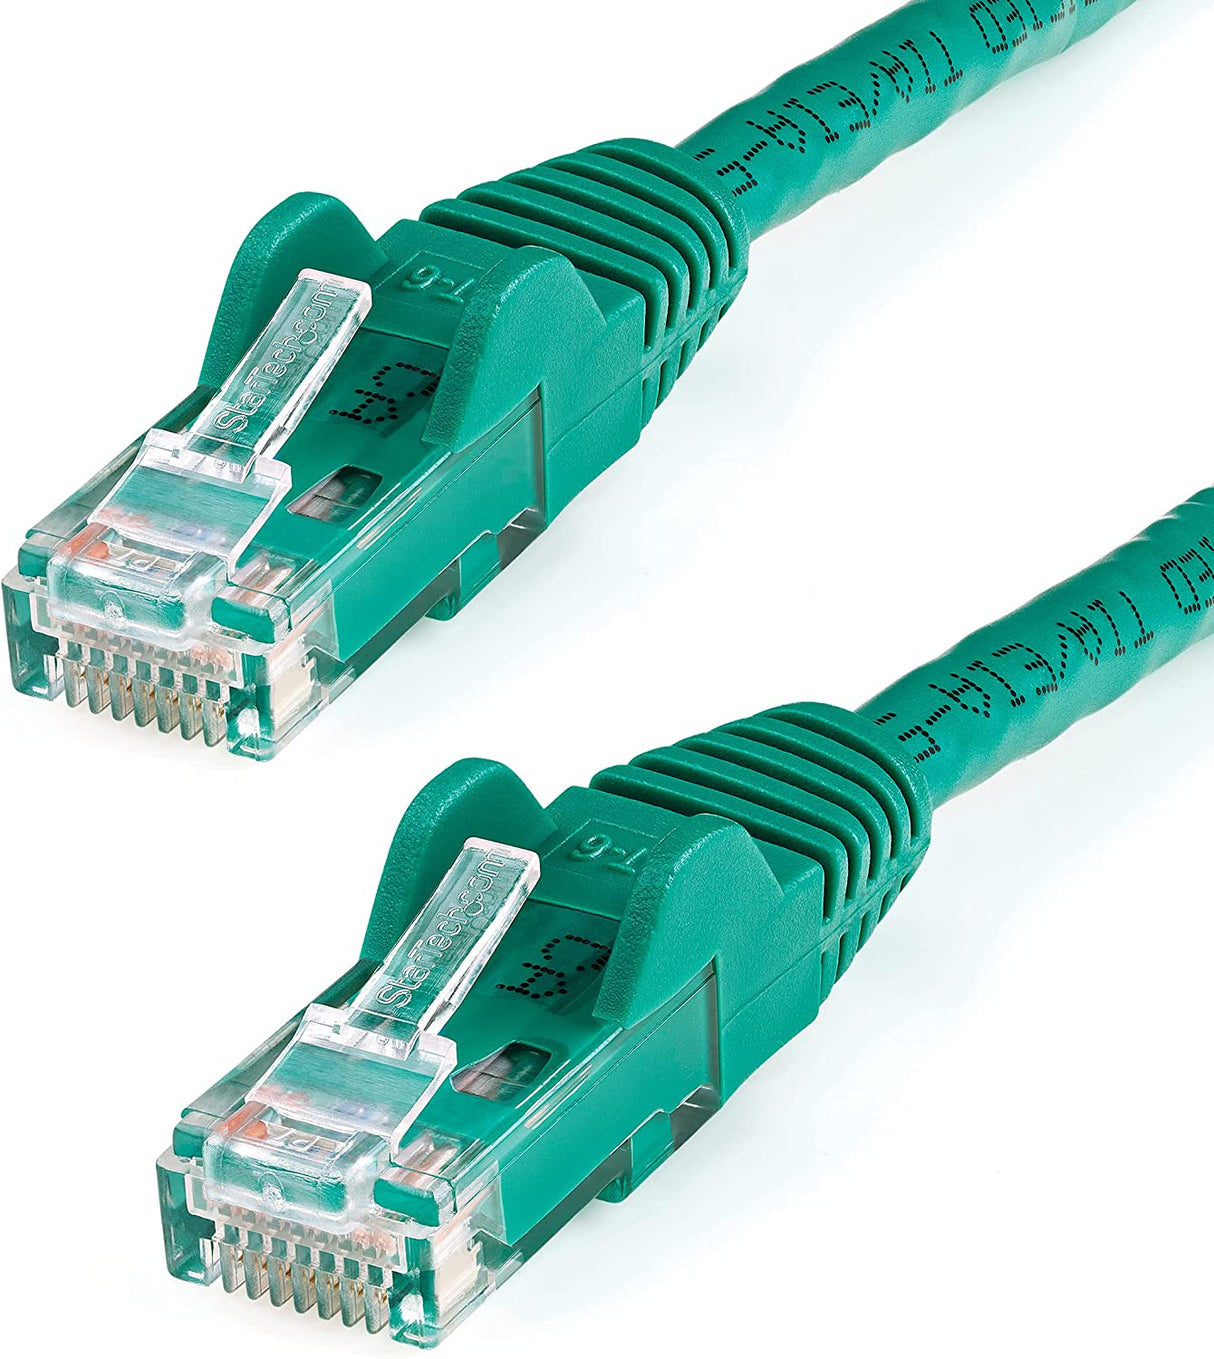 StarTech.com 1ft CAT6 Ethernet Cable - Green CAT 6 Gigabit Ethernet Wire -650MHz 100W PoE RJ45 UTP Network/Patch Cord Snagless w/Strain Relief Fluke Tested/Wiring is UL Certified/TIA (N6PATCH1GN) Green 1 ft / 0.3 m 1 Pack